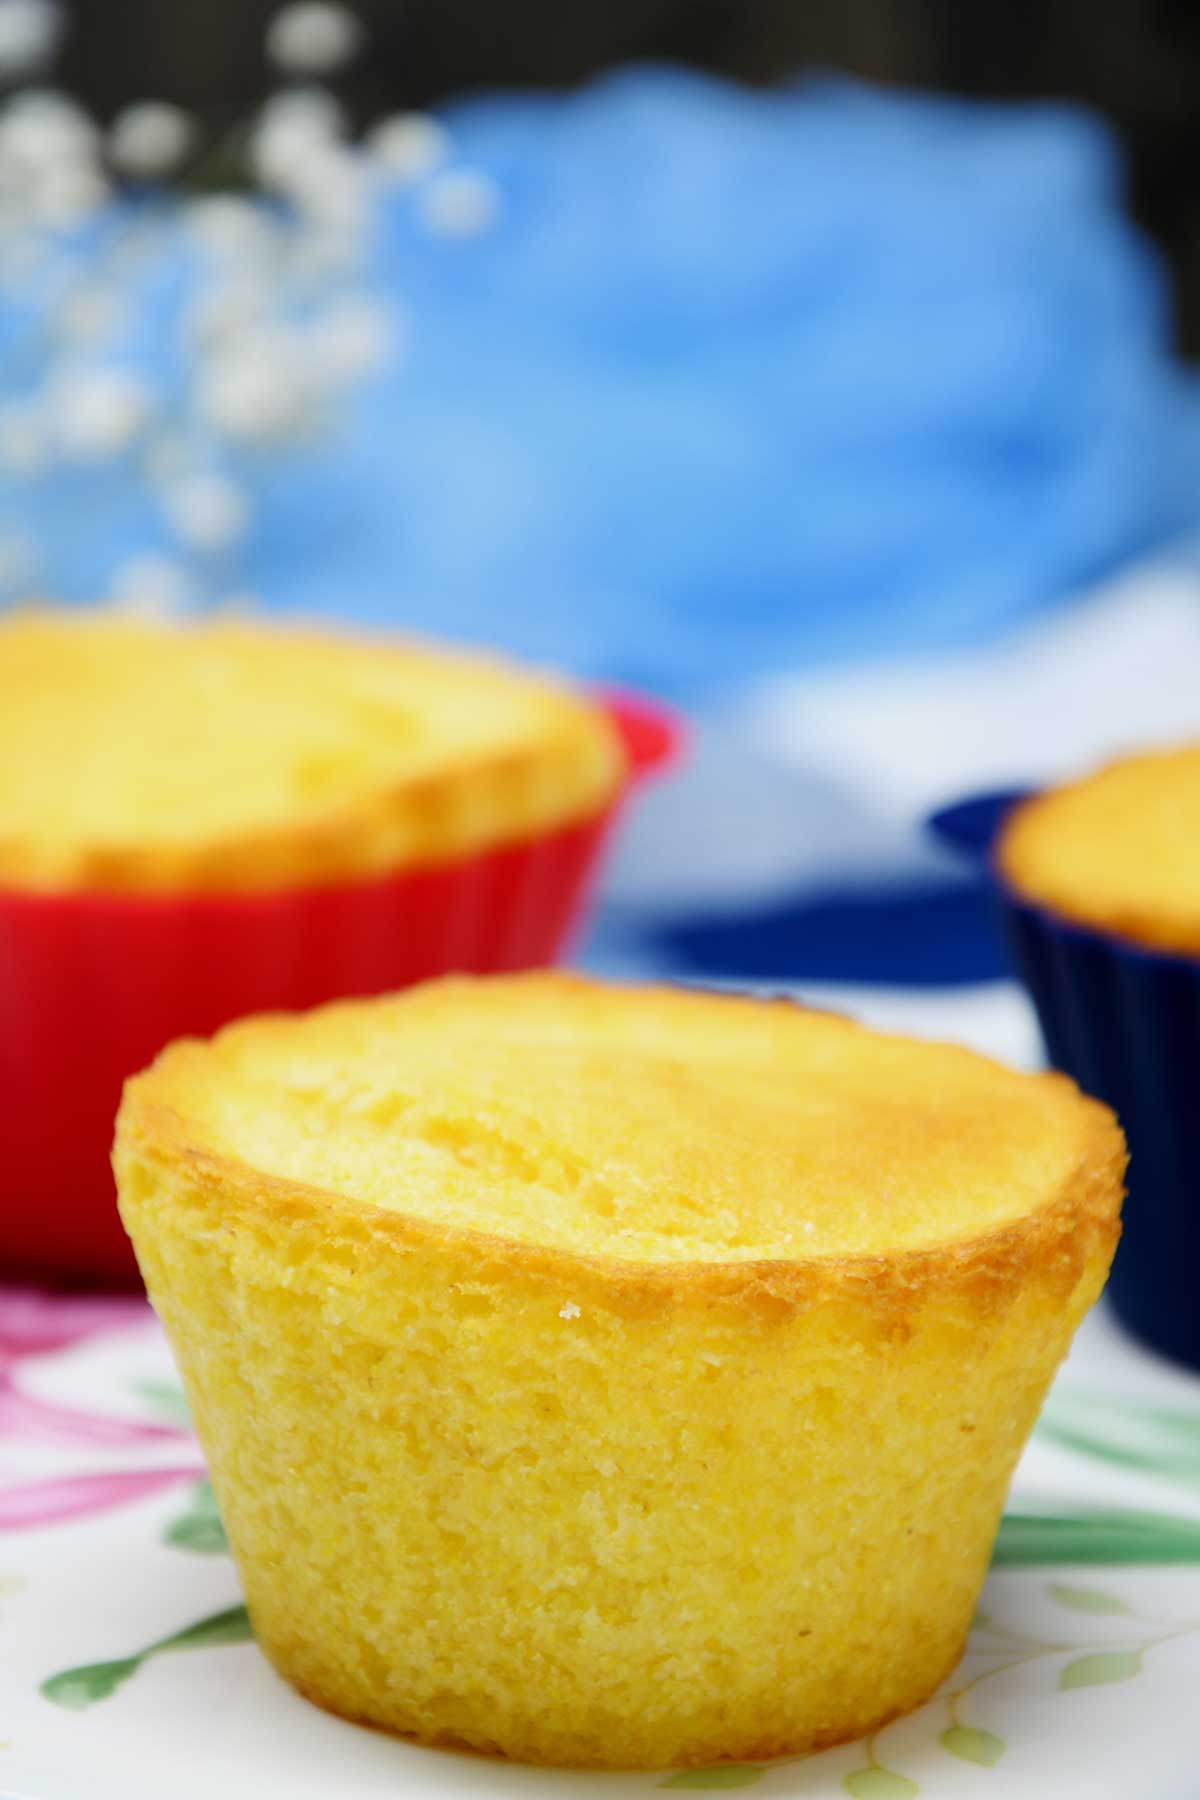 Corn bread muffins served on cheese board.